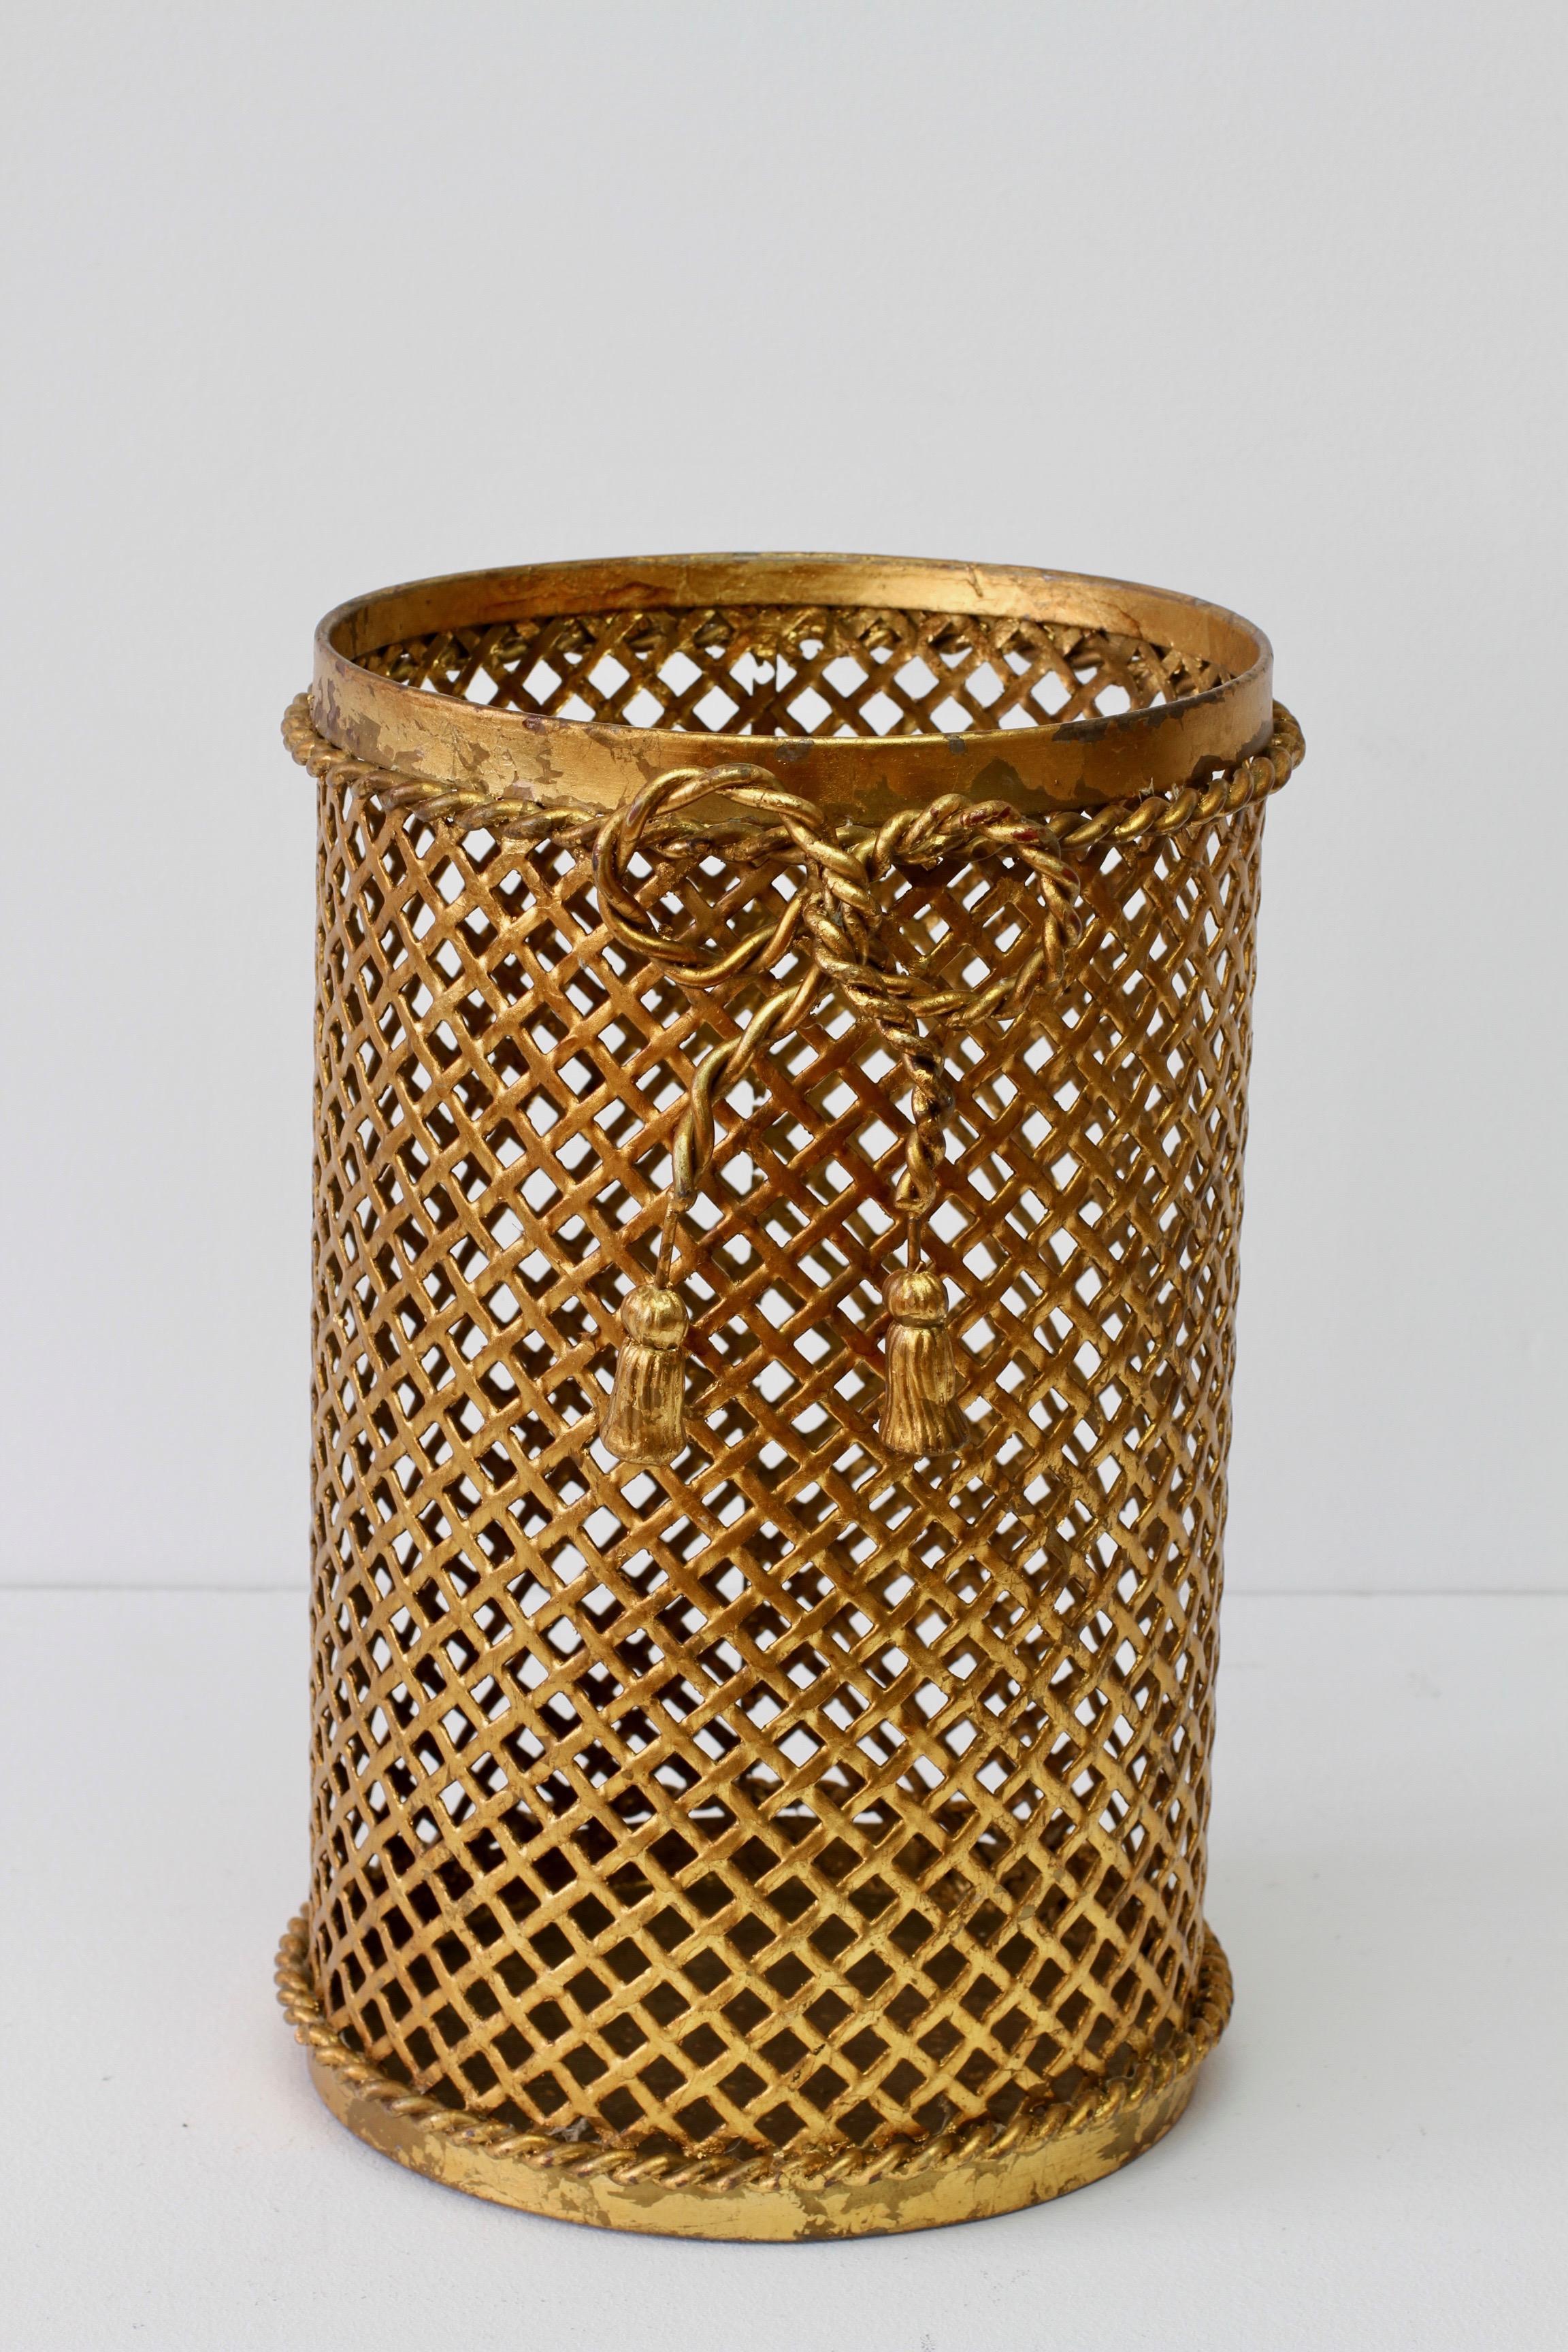 Stunning midcentury vintage gold / gilt / gilded Hollywood Regency style trash can / bin / waste paper basket made in Italy, circa 1950. The perforated lattice patterned metalwork with bent rope and tassel details finishes the piece perfectly. Quite